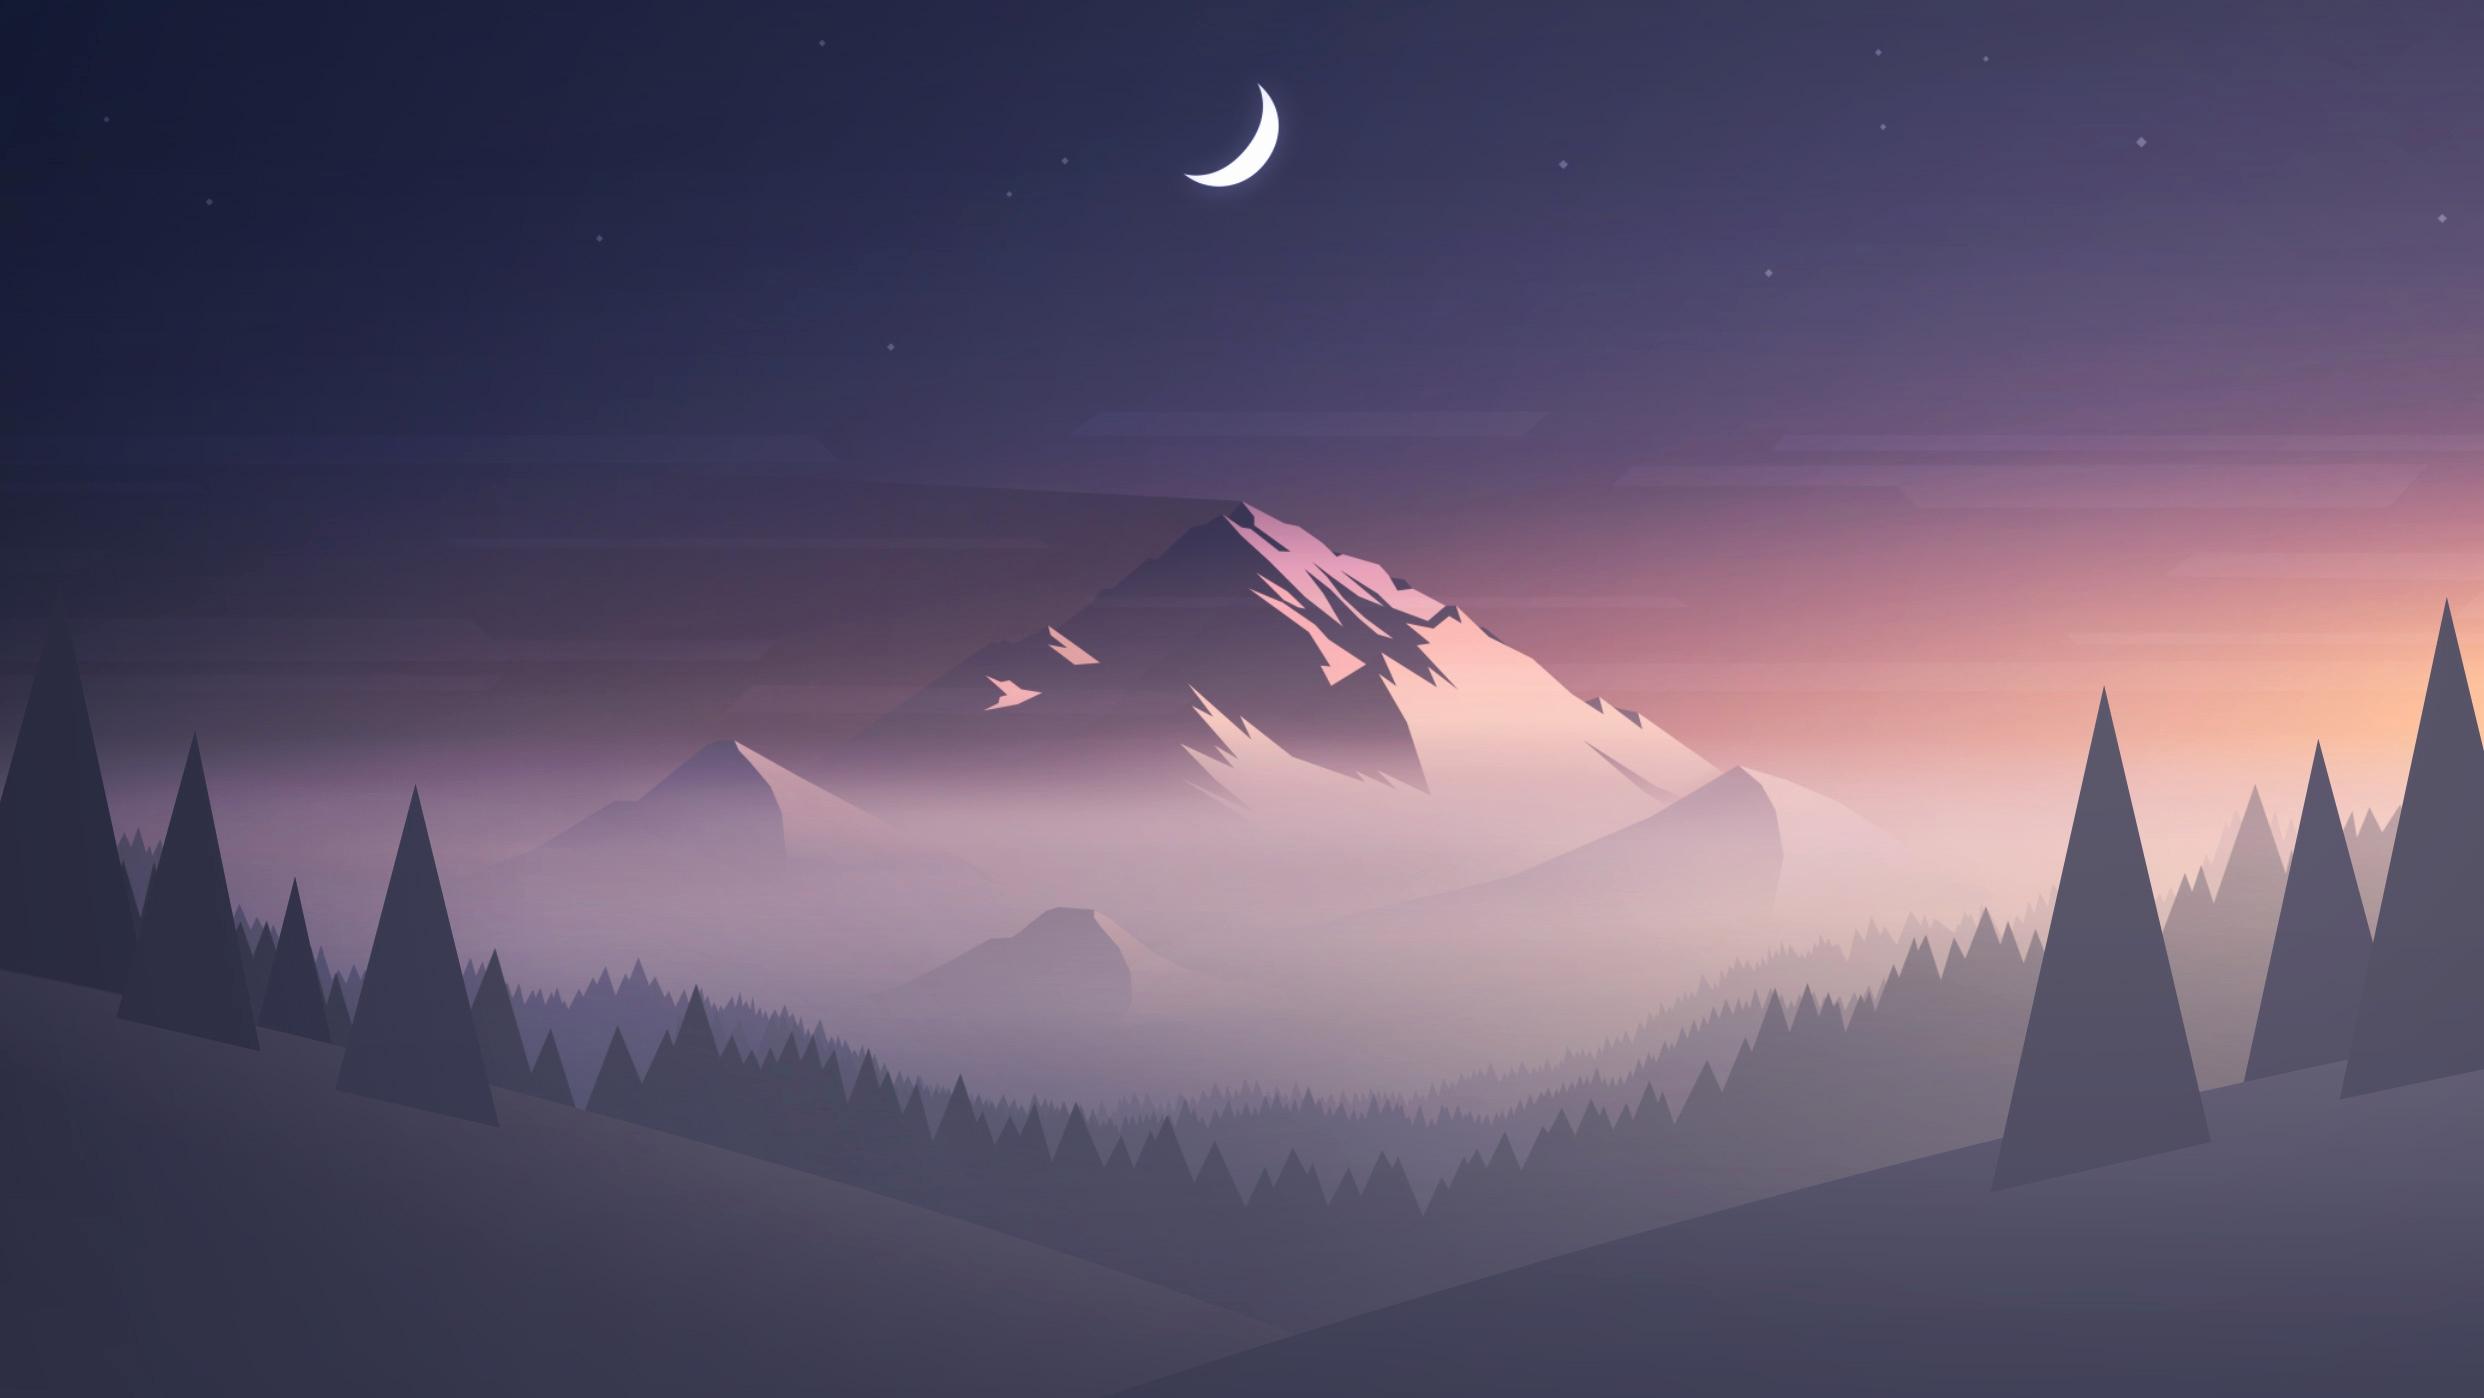 Minimal Mountains In Day Wallpapers